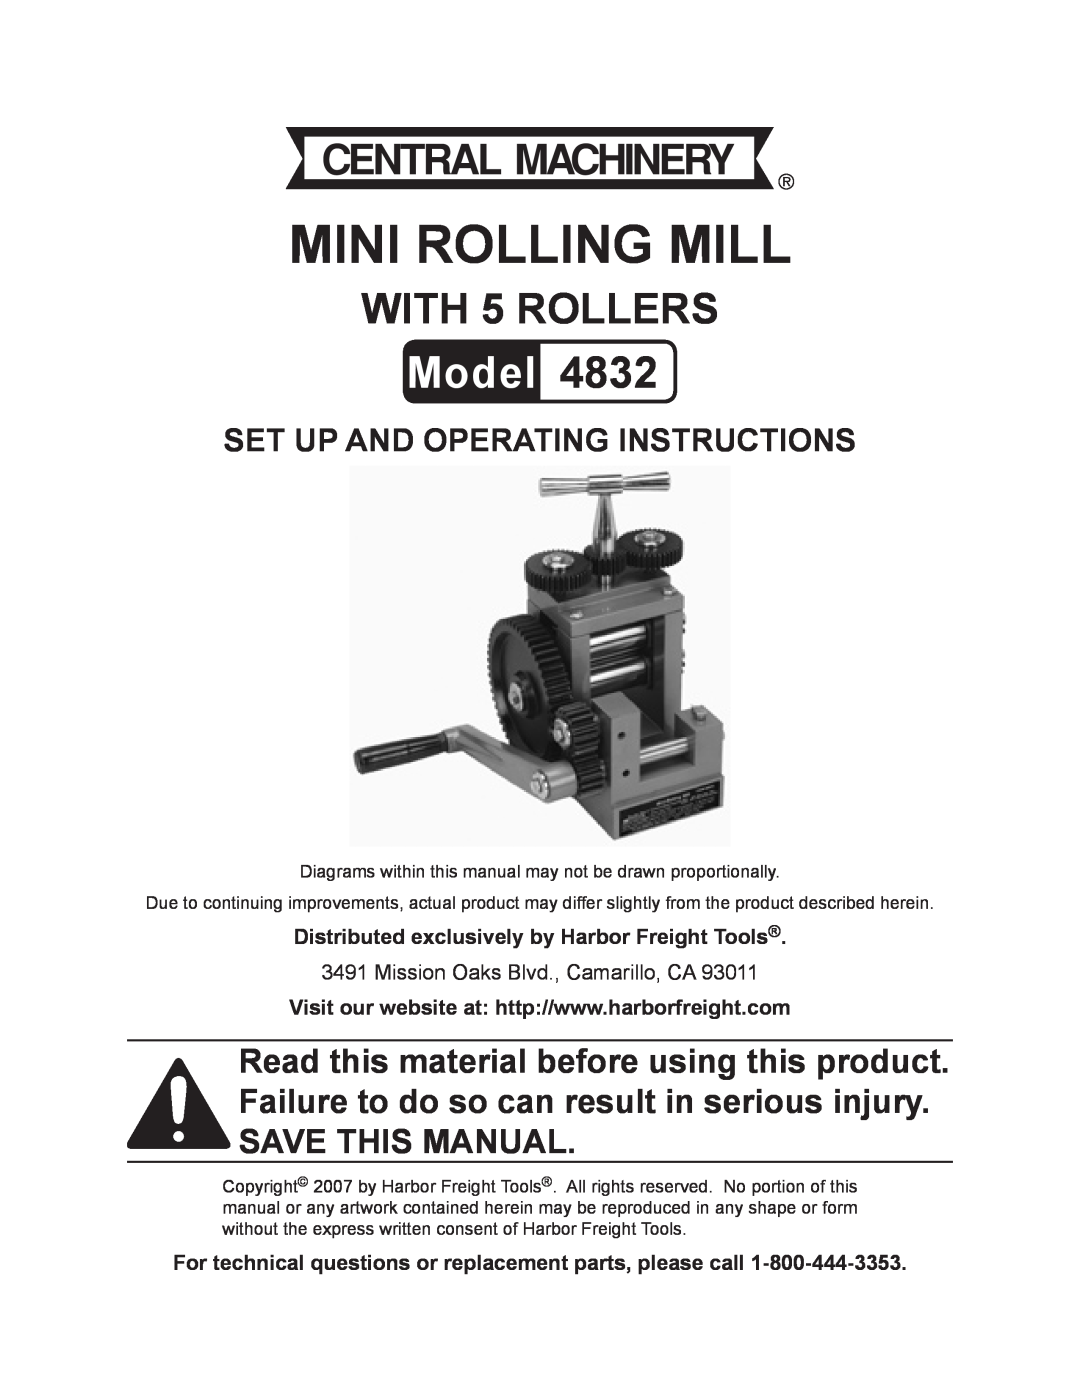 Harbor Freight Tools 4832 manual Distributed exclusively by Harbor Freight Tools, Mini rolling Mill, Model, With 5 rollers 